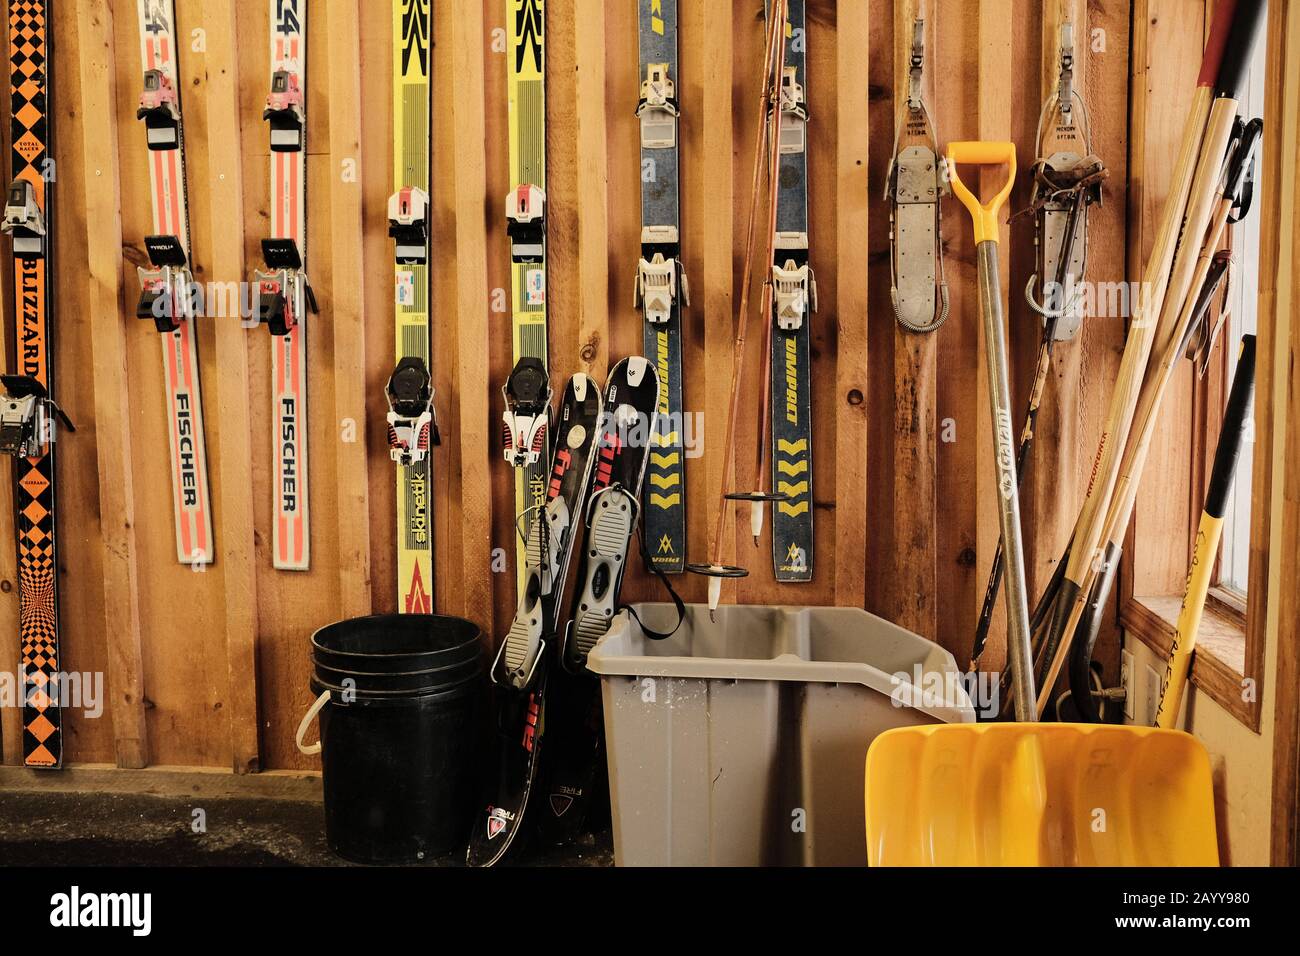 Skis though the ages - progression of historic skis hanging from a wooden chalet wall, Ottawa, Ontario, Canada. Stock Photo